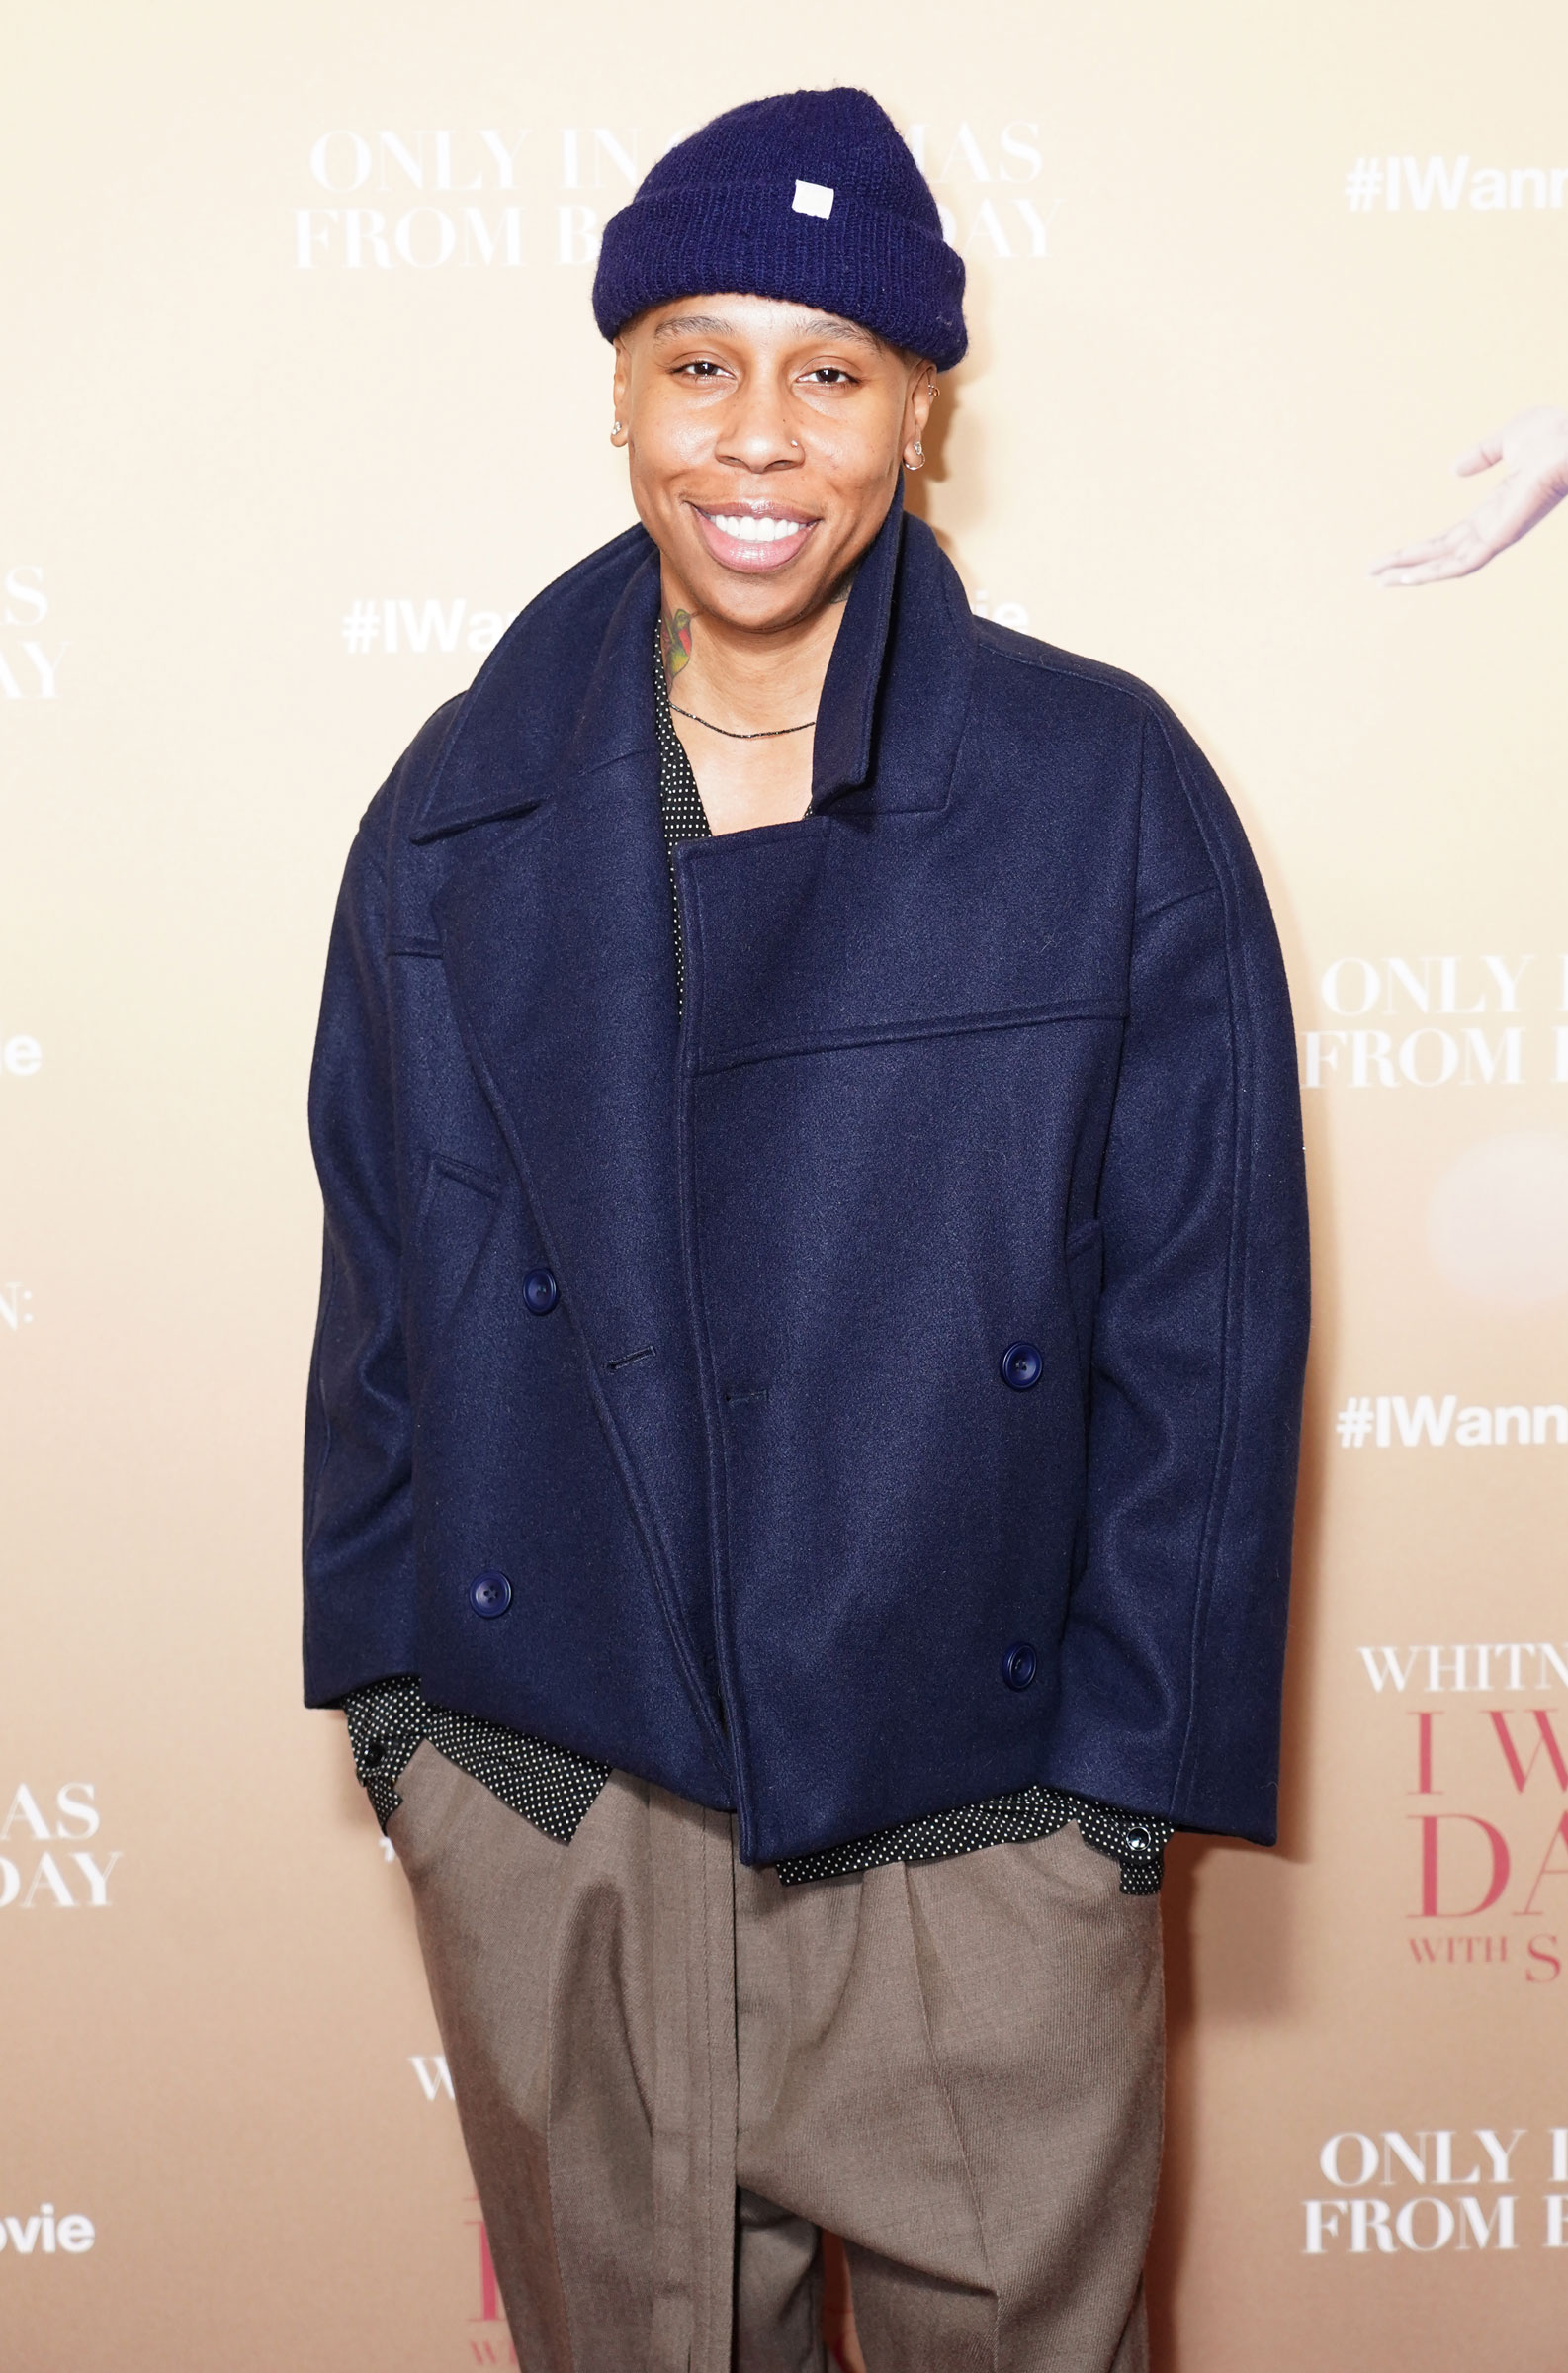 Lena Waithe arrives for the gala screening of I Want To Dance With Somebody at the Ham Yard Hotel in London on Dec. 19, 2022.